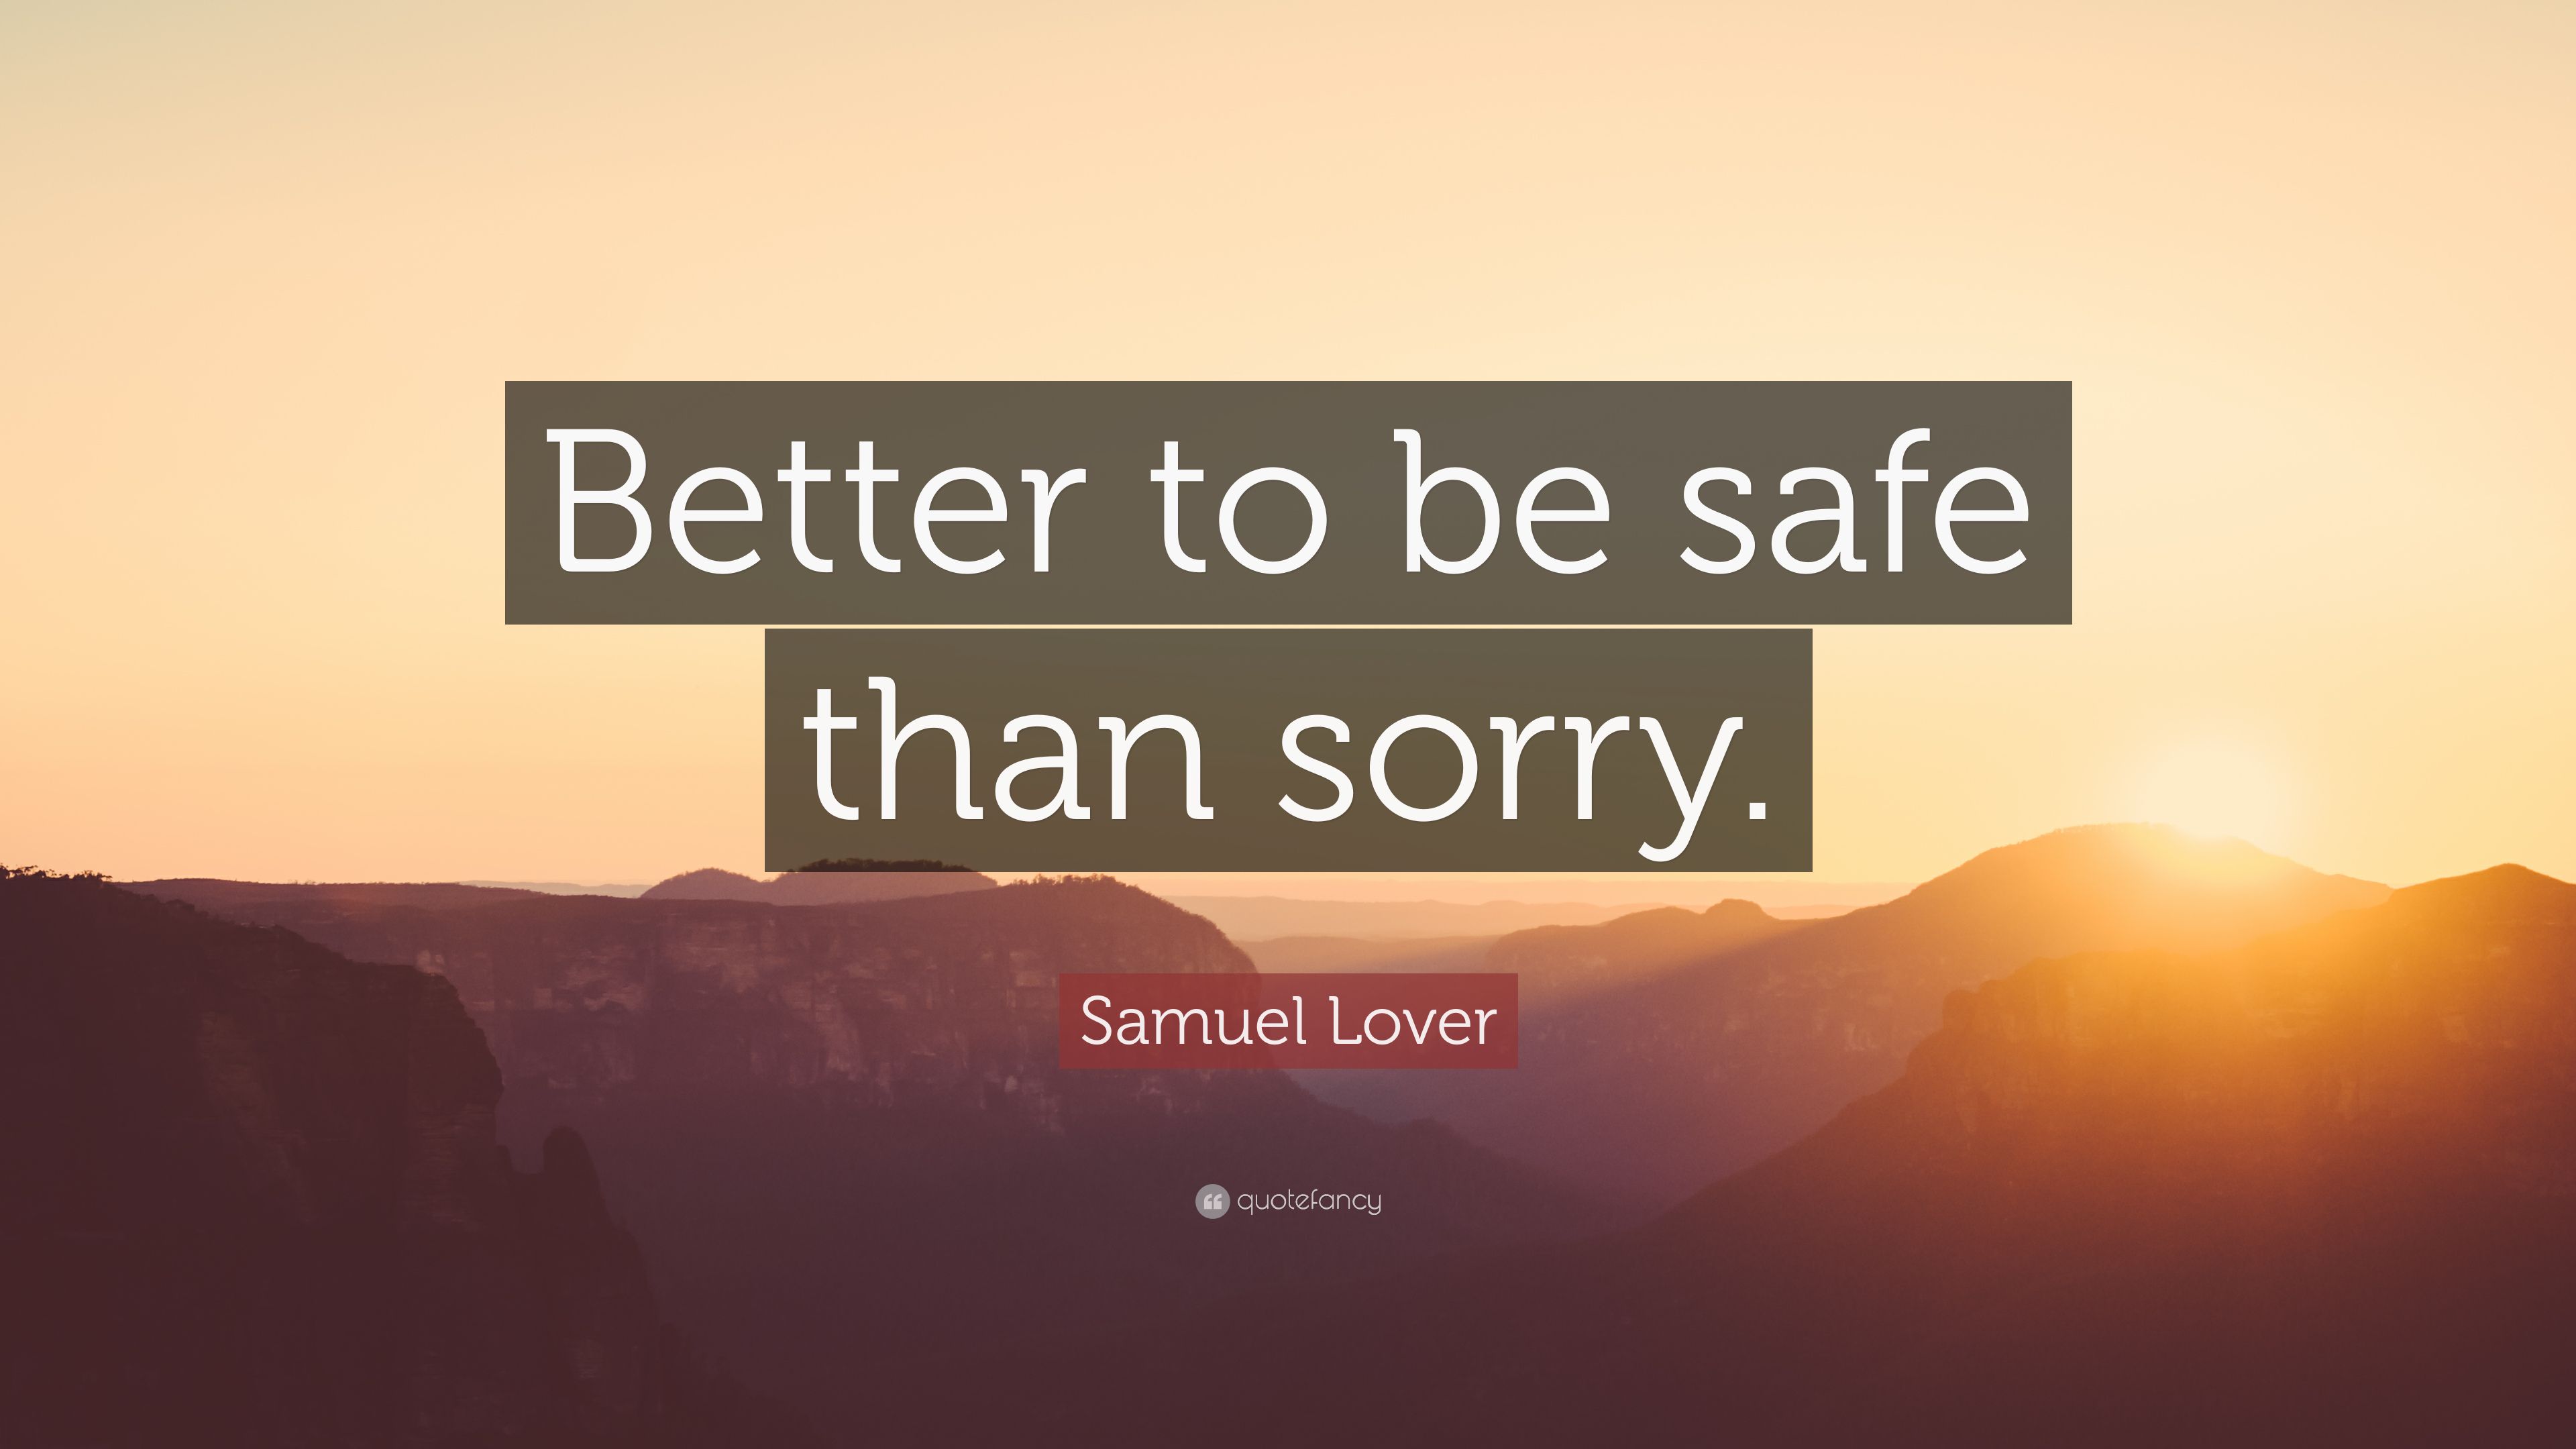 Samuel Lover Quote: “Better to be safe than sorry.” 7 wallpaper